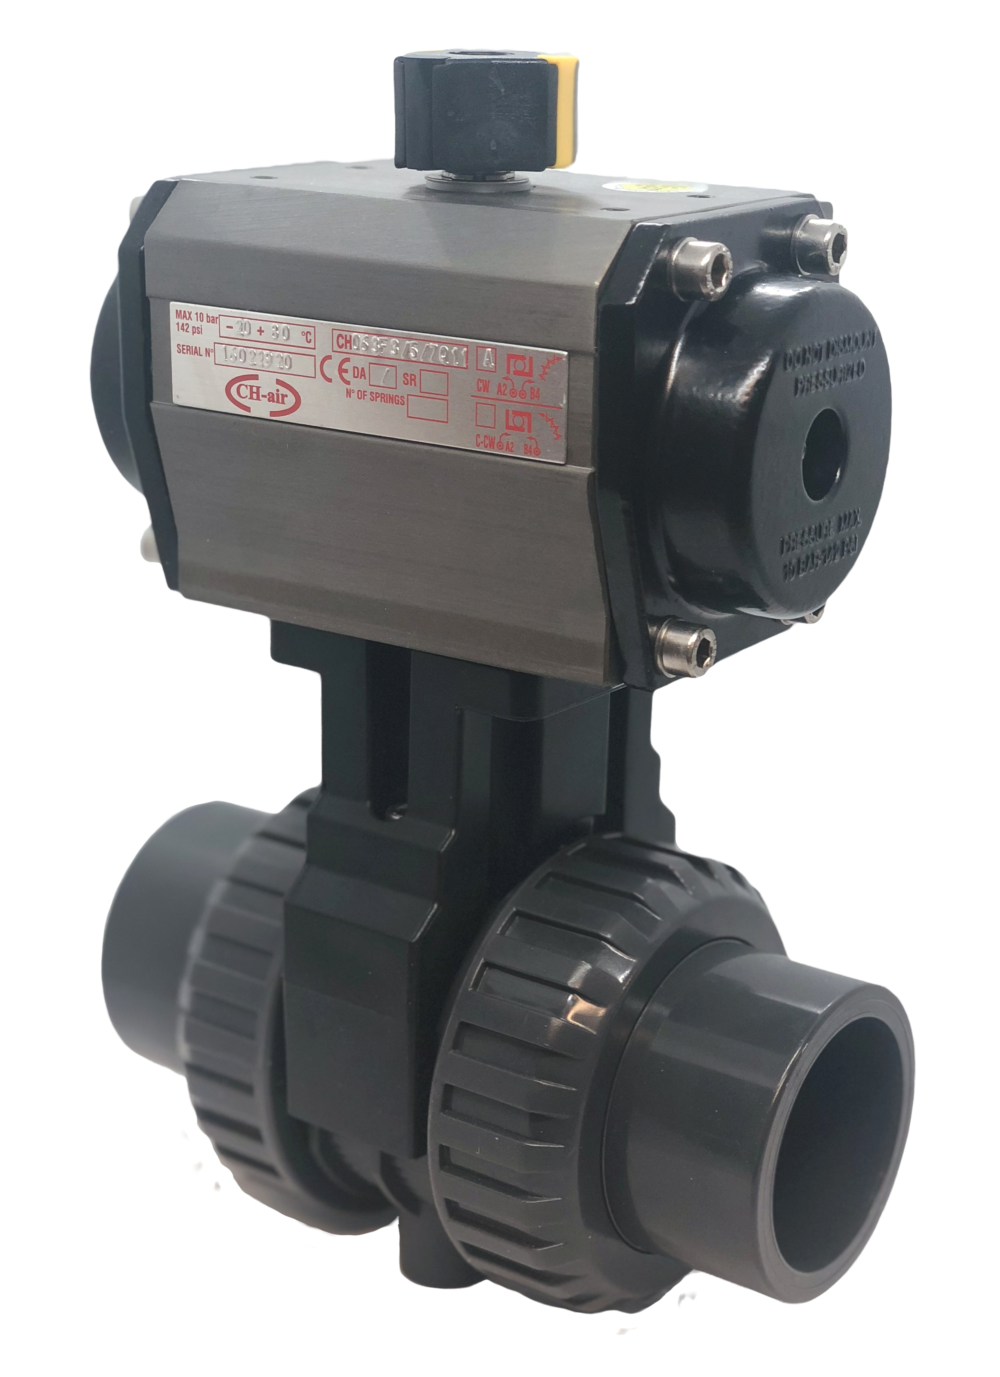 Cepex Extreme PVC Ball Valve with CH-air Pneumatic Actuator